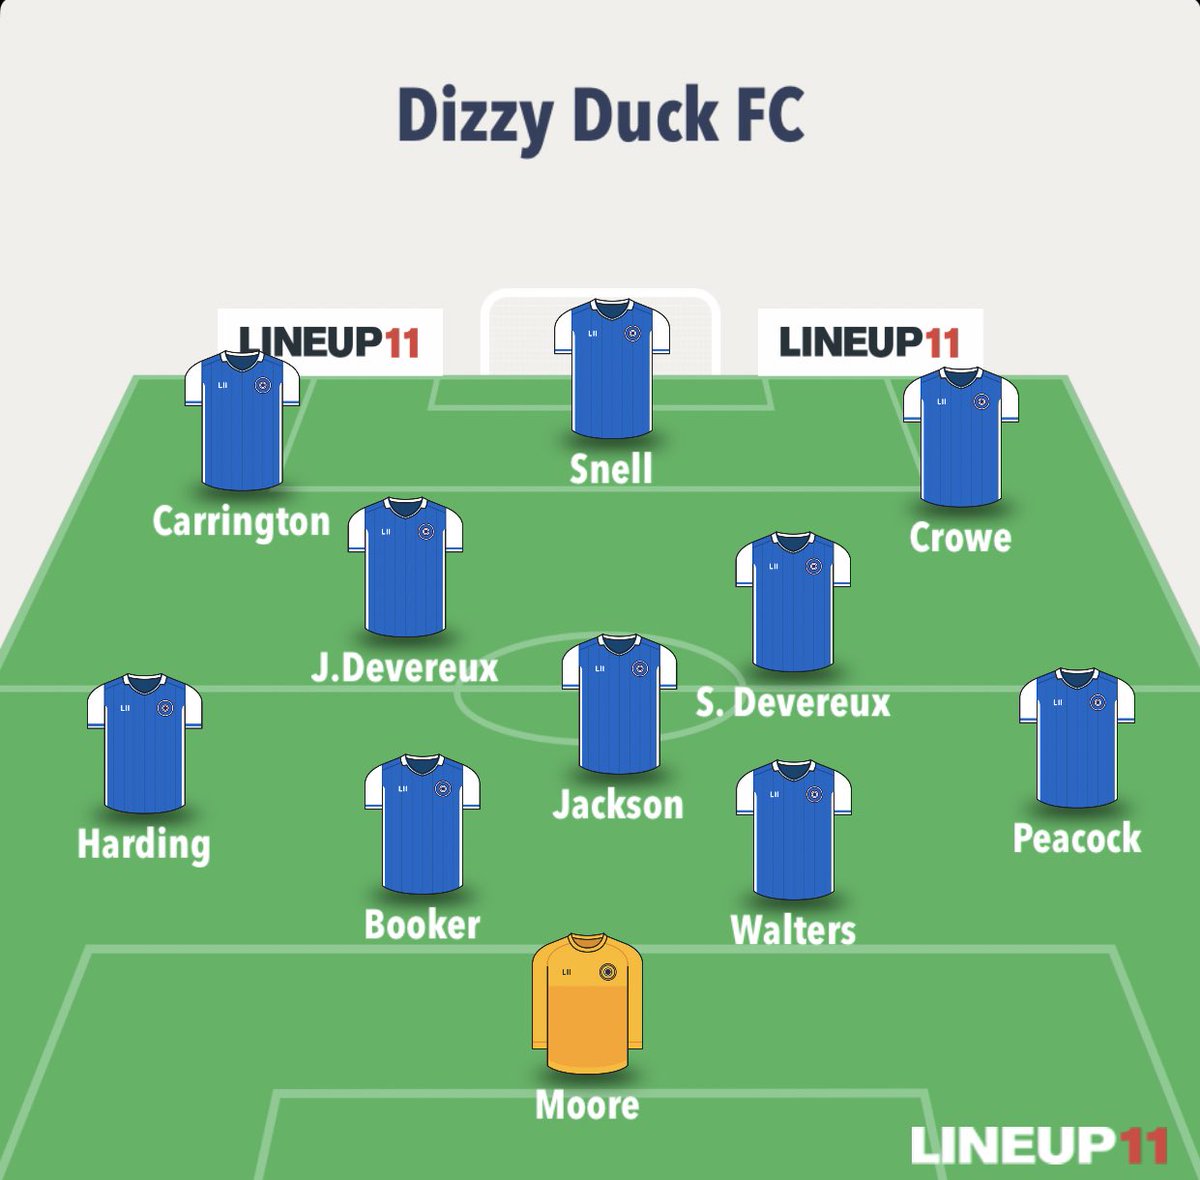 Here’s how Dizzy start.

Subs: Clayton, Reynolds. 

#uptheducks 😵‍💫🦆